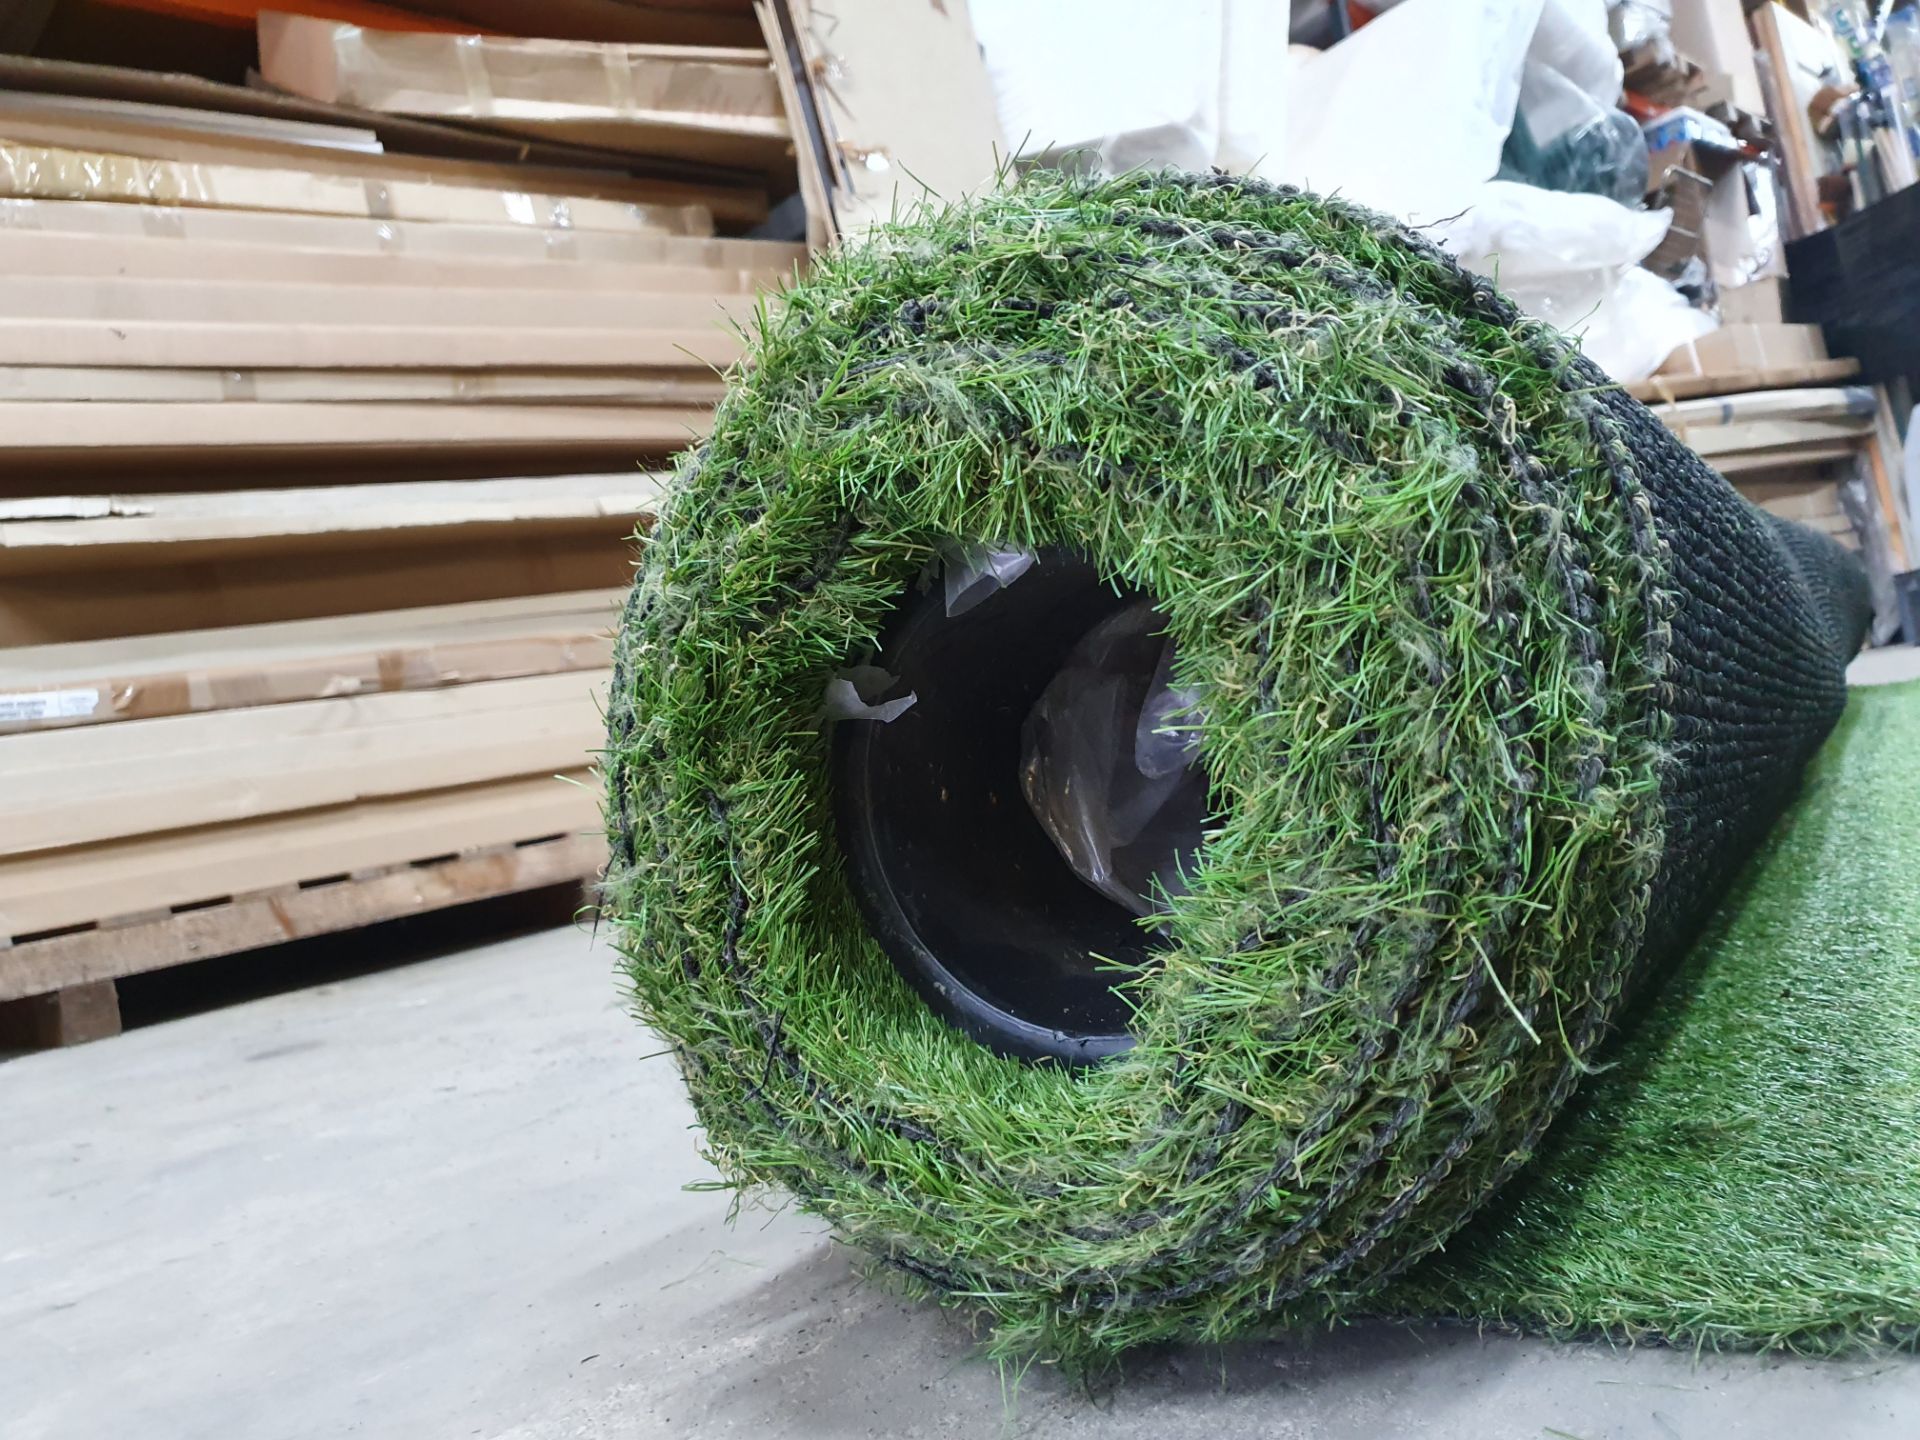 Roll of Green Artifical Grass | Approximate size: 4m x 4m - Image 2 of 4